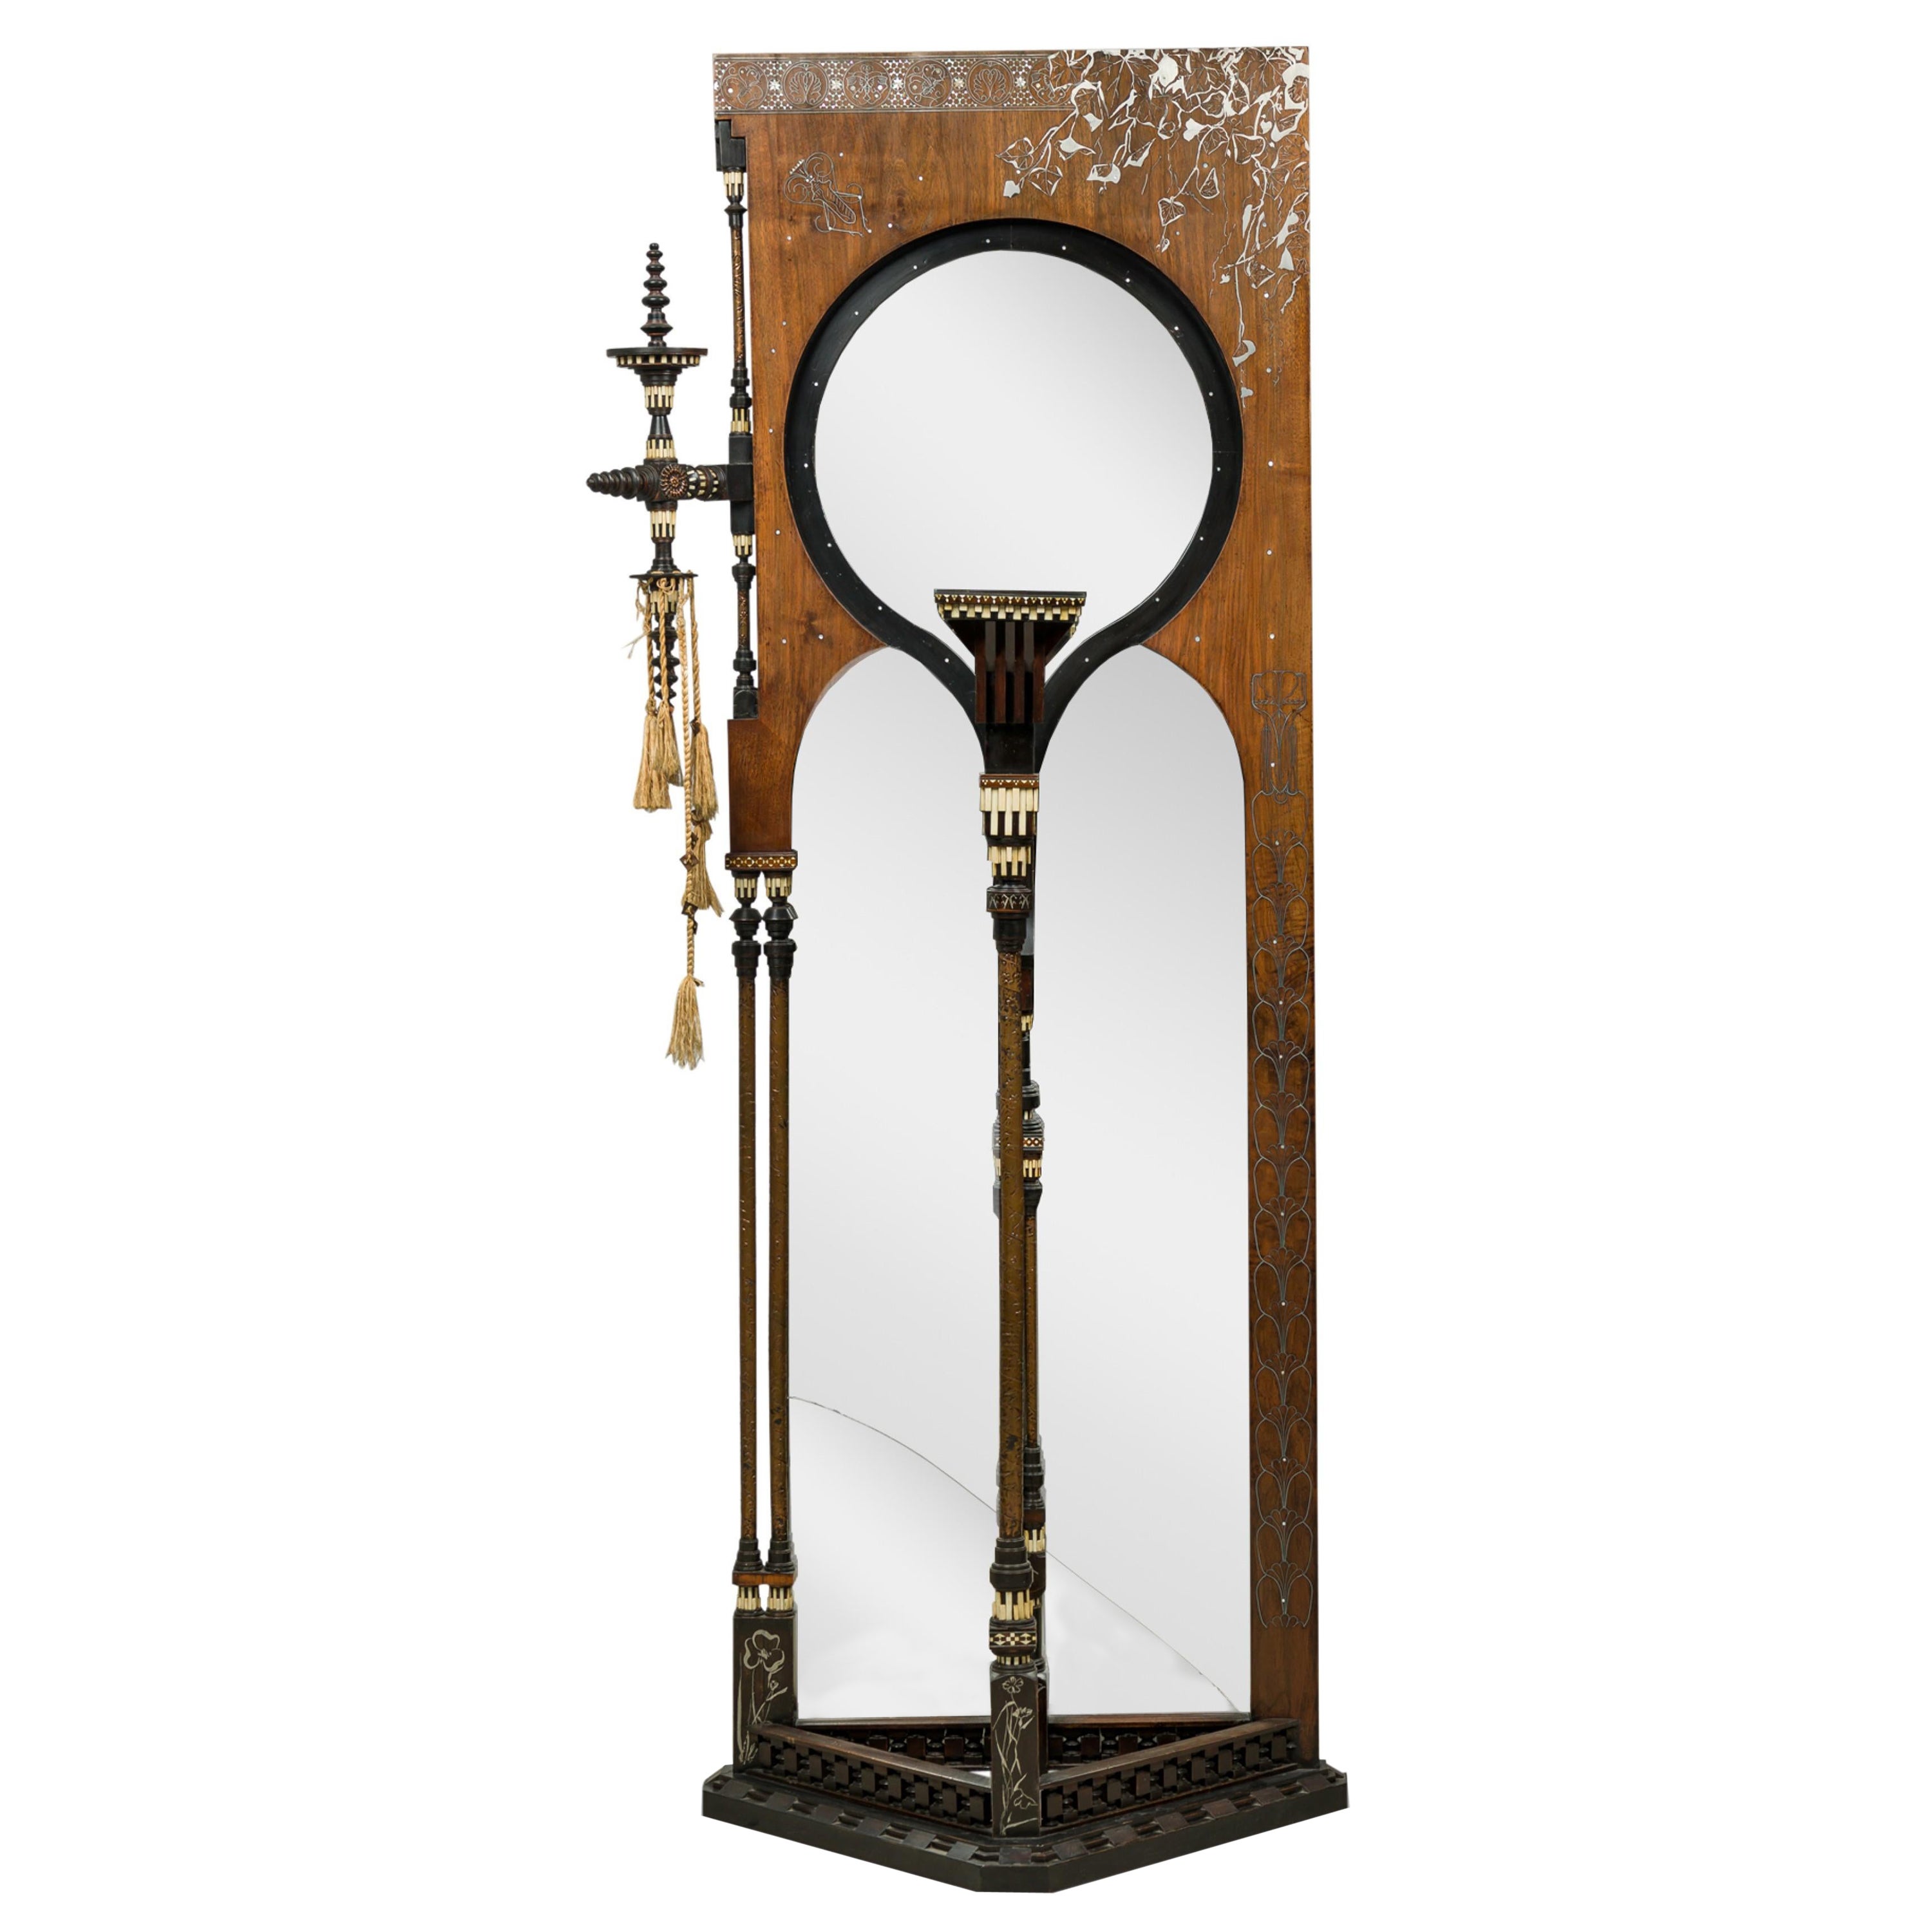 Carlo Bugatti Mirrored Hall/Hat Stand with Mother of Pearl, Silver, & Bone Inlay